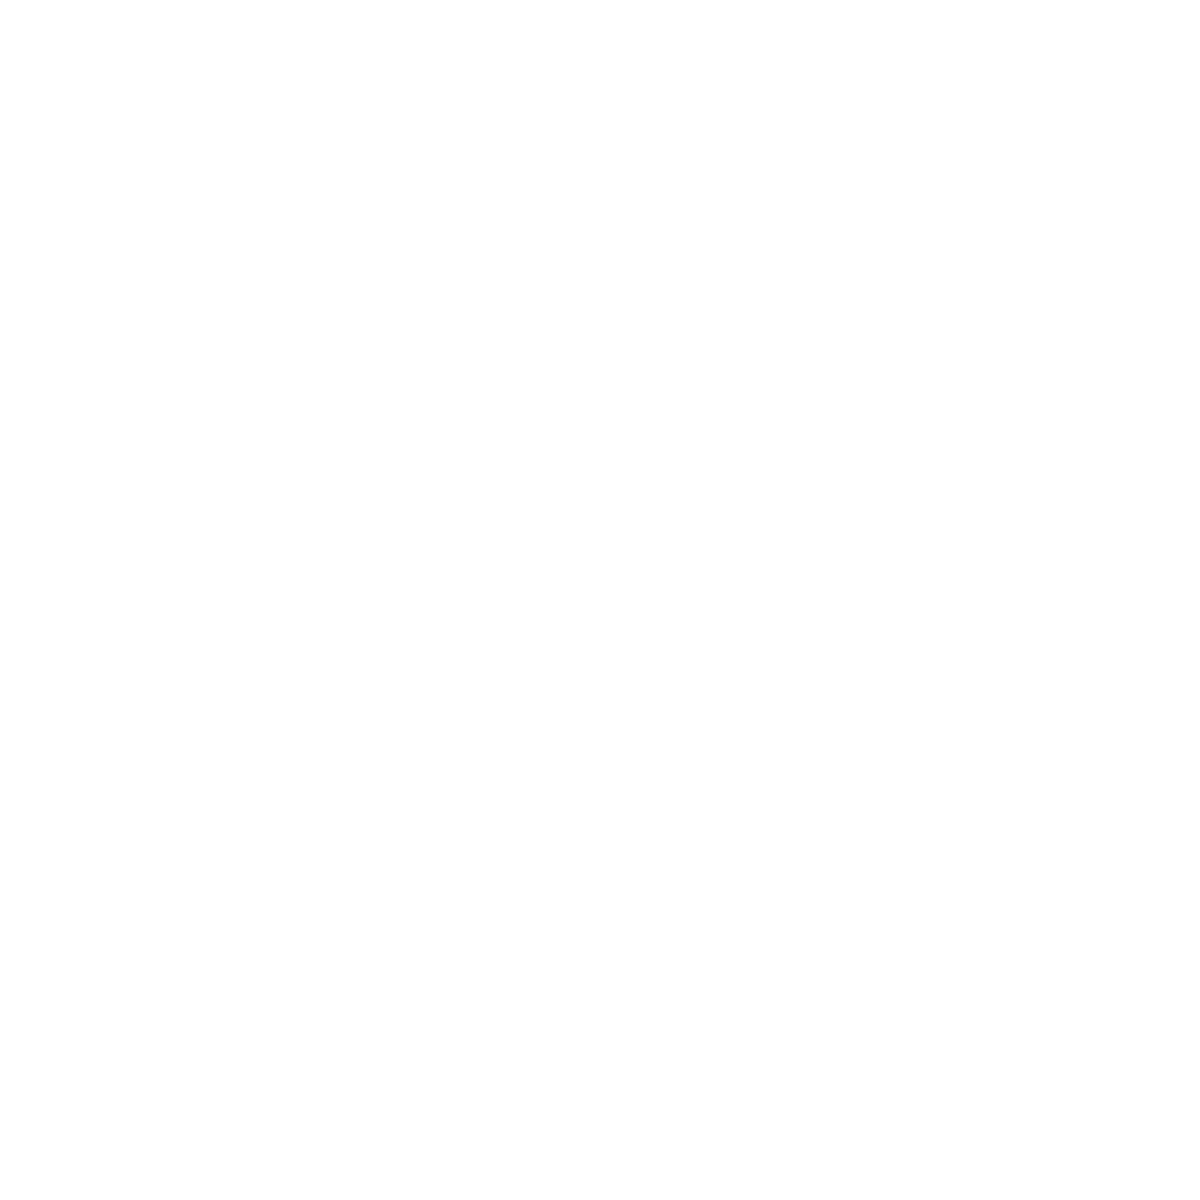 Made in the USA badge icon